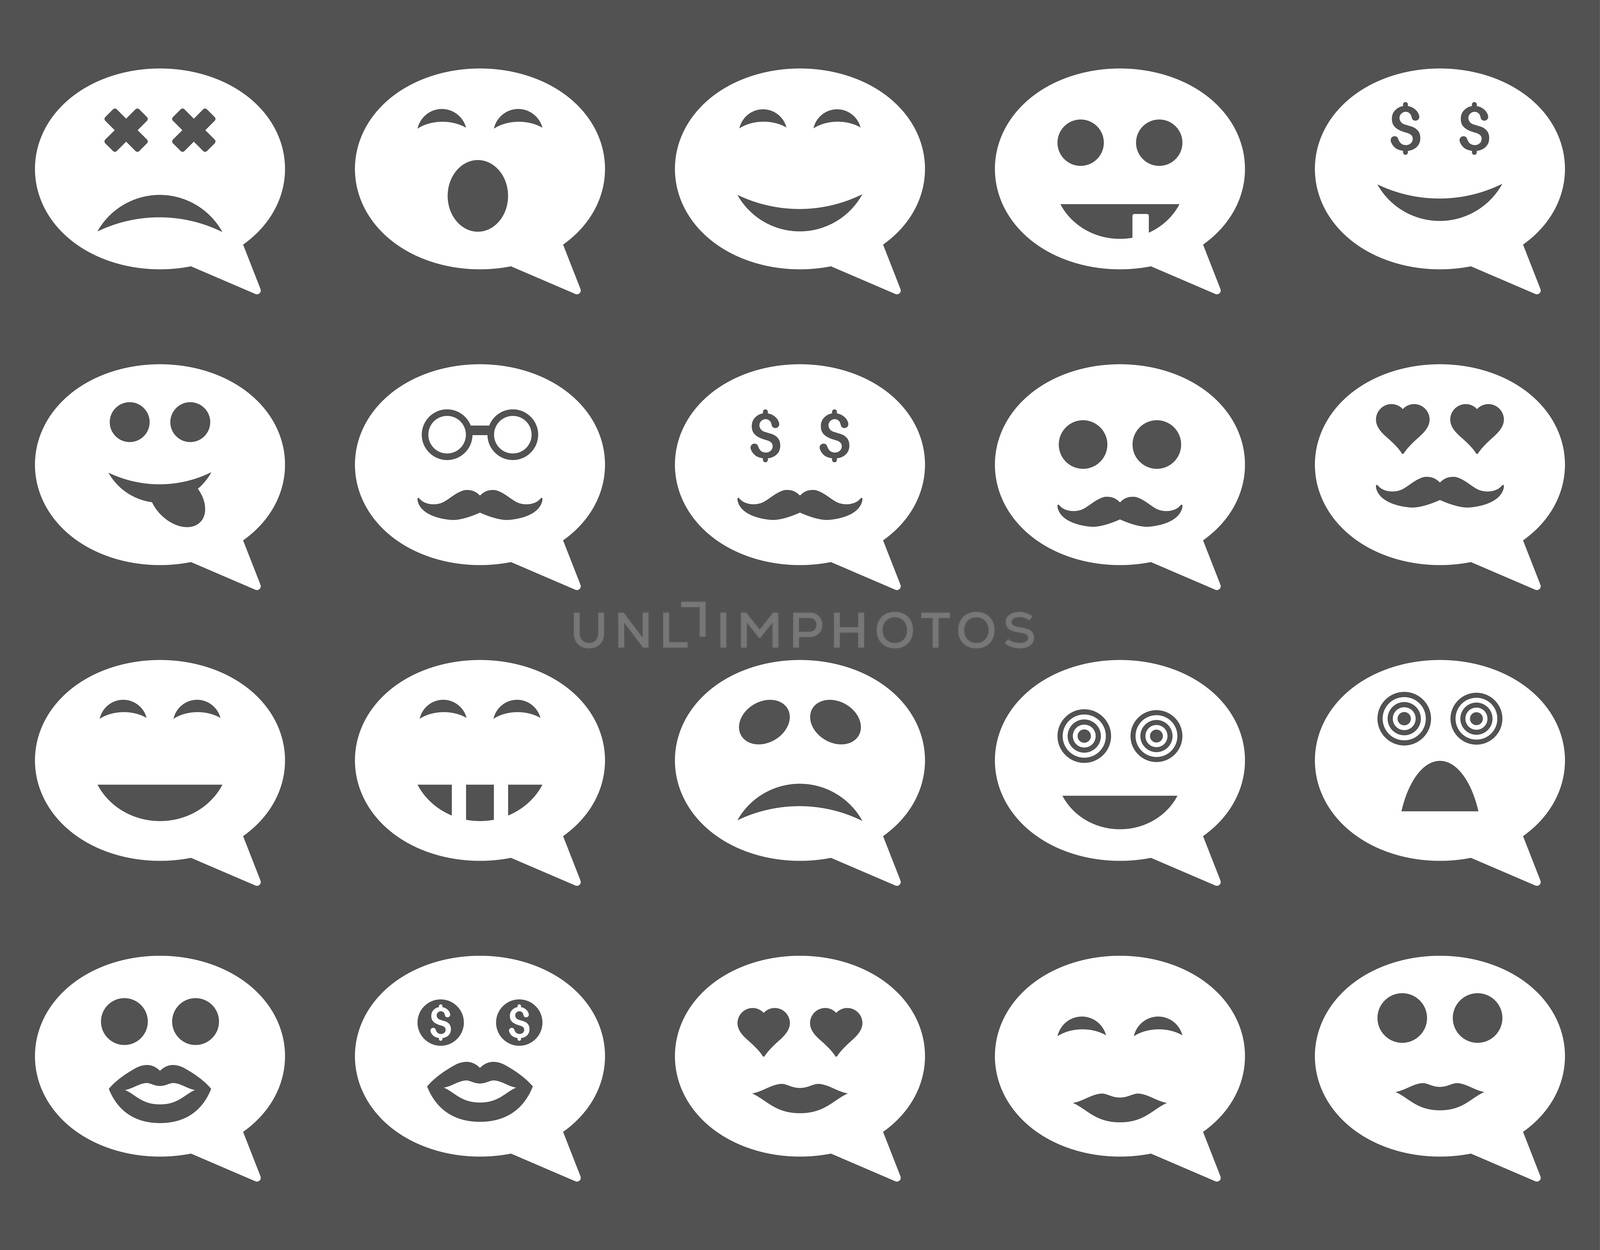 Chat emotion smile icons. Glyph set style is flat images, white symbols, isolated on a gray background.